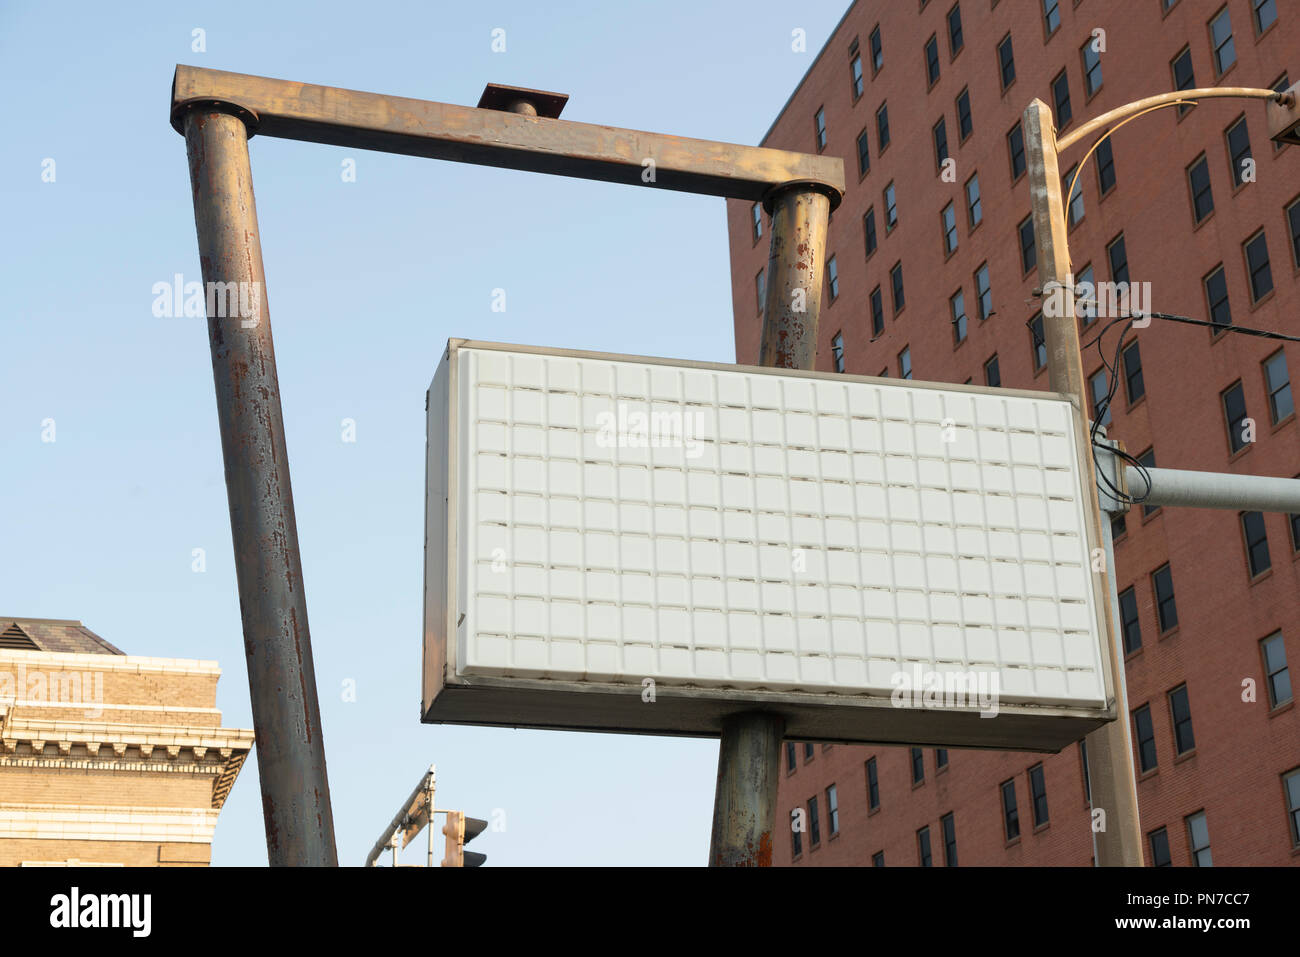 A business and building has been abandoned leaving nothing on the sign Stock Photo